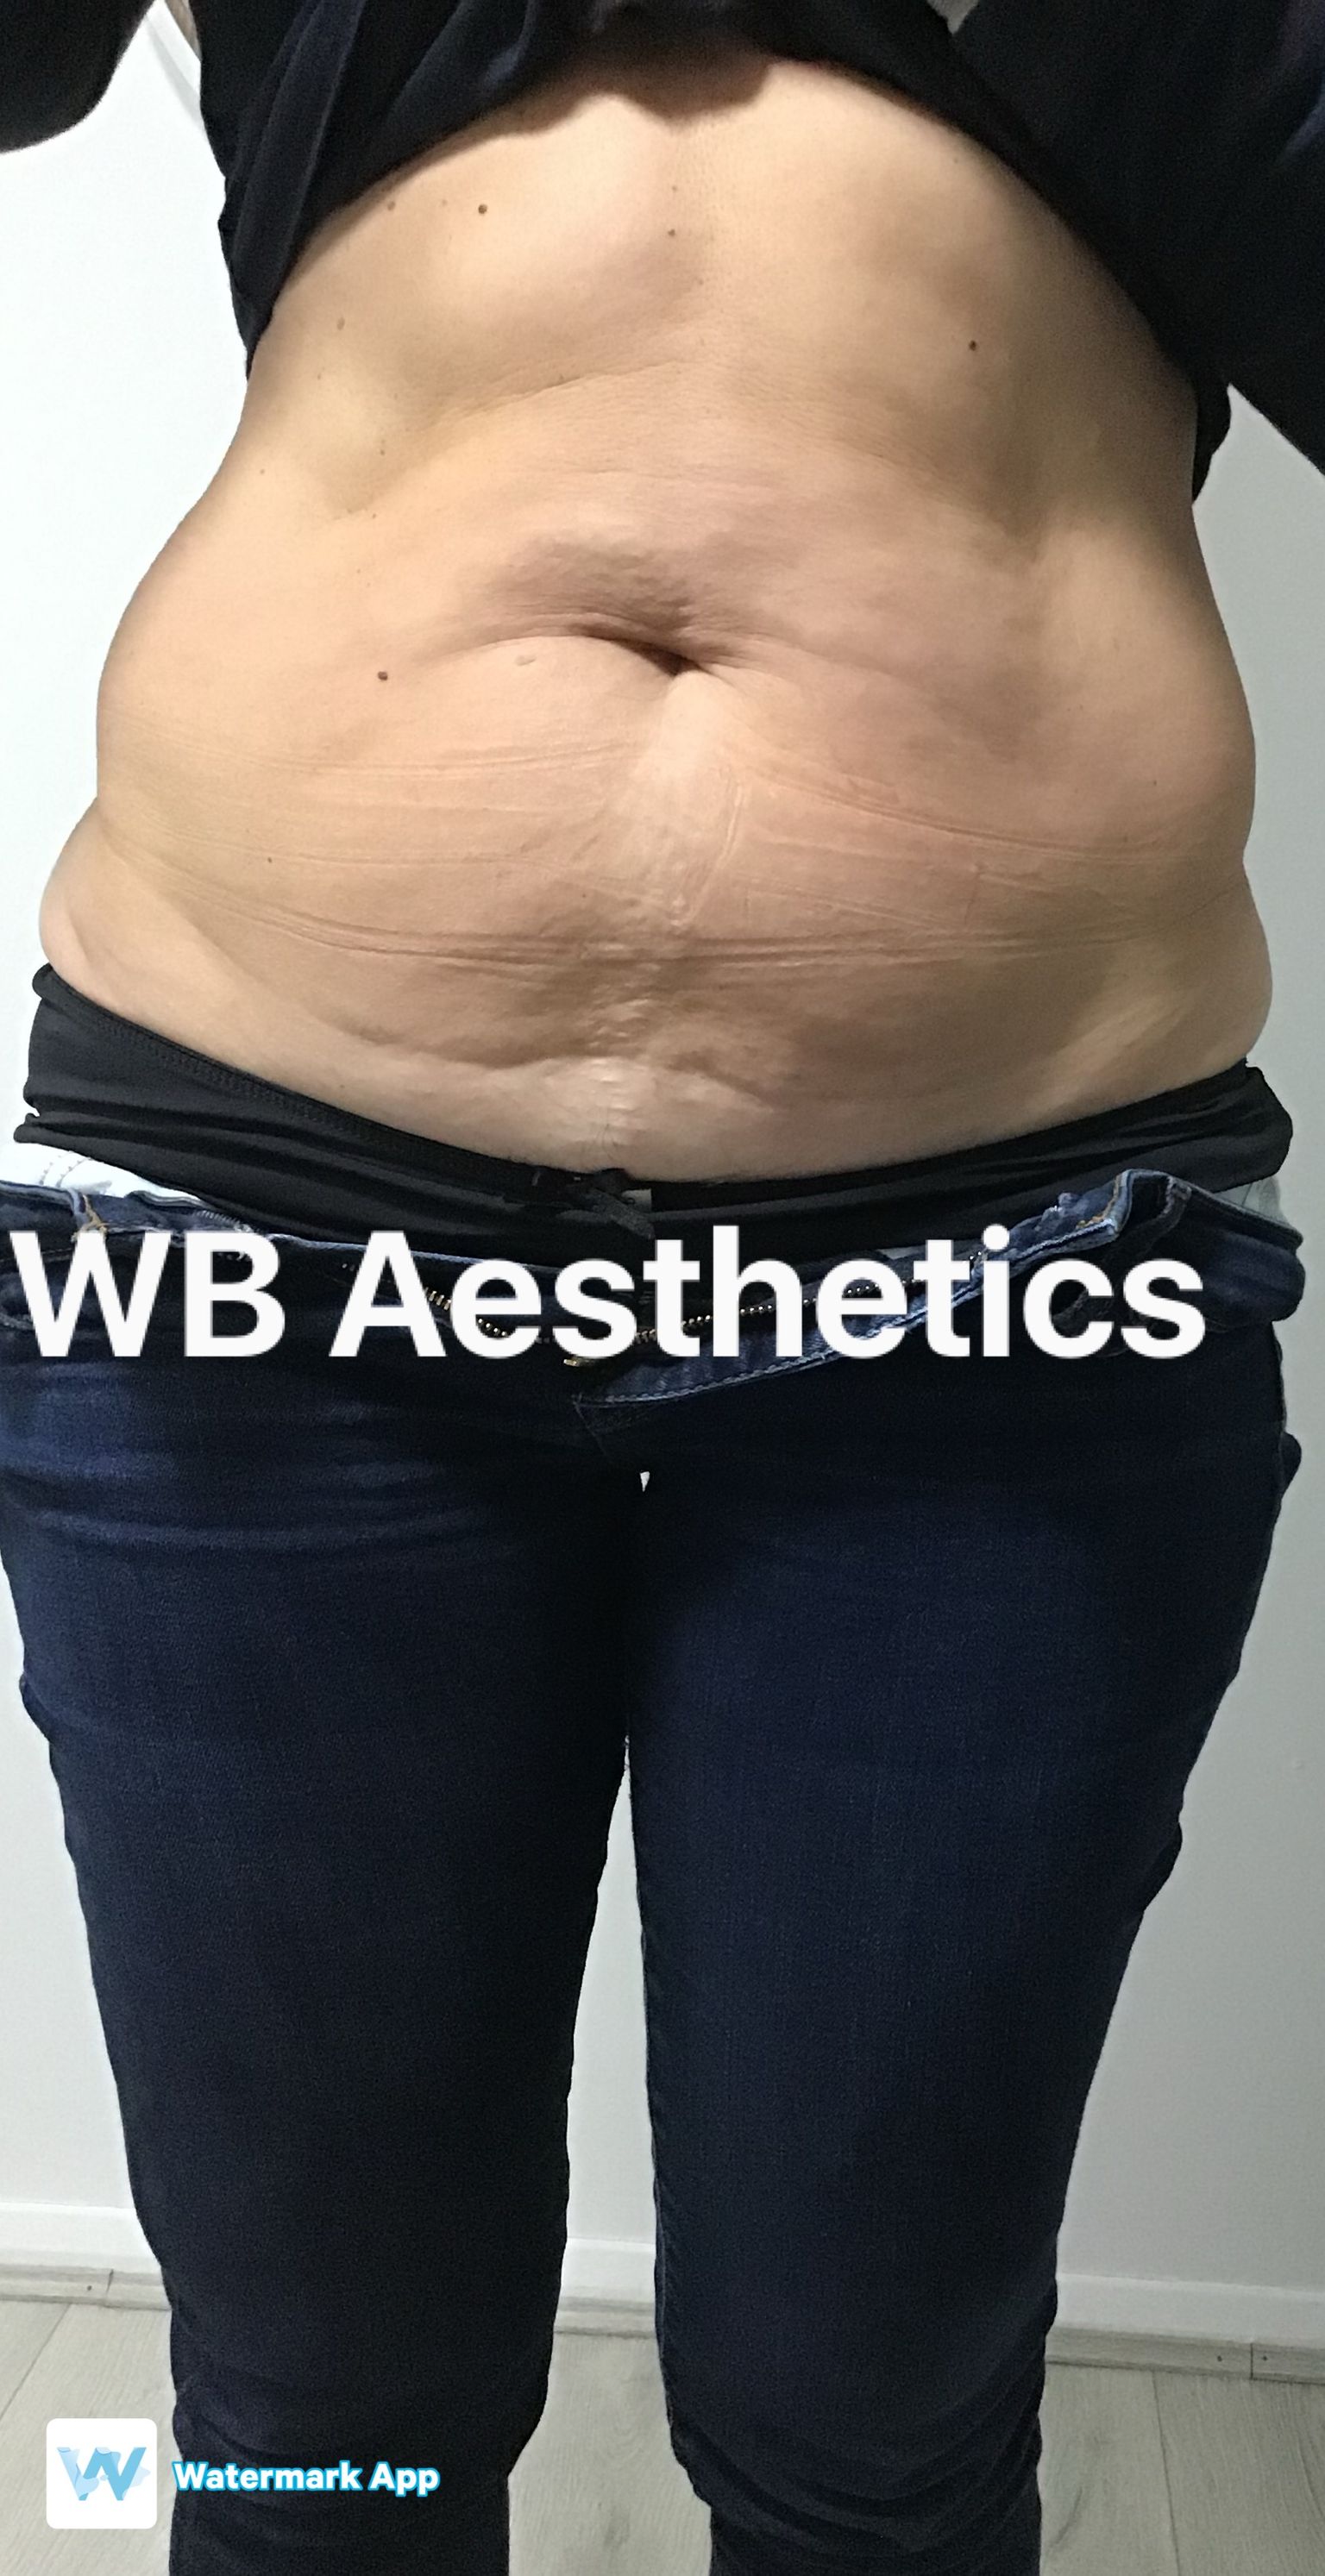 Patient after fat reduction treatment with WB Aesthetics